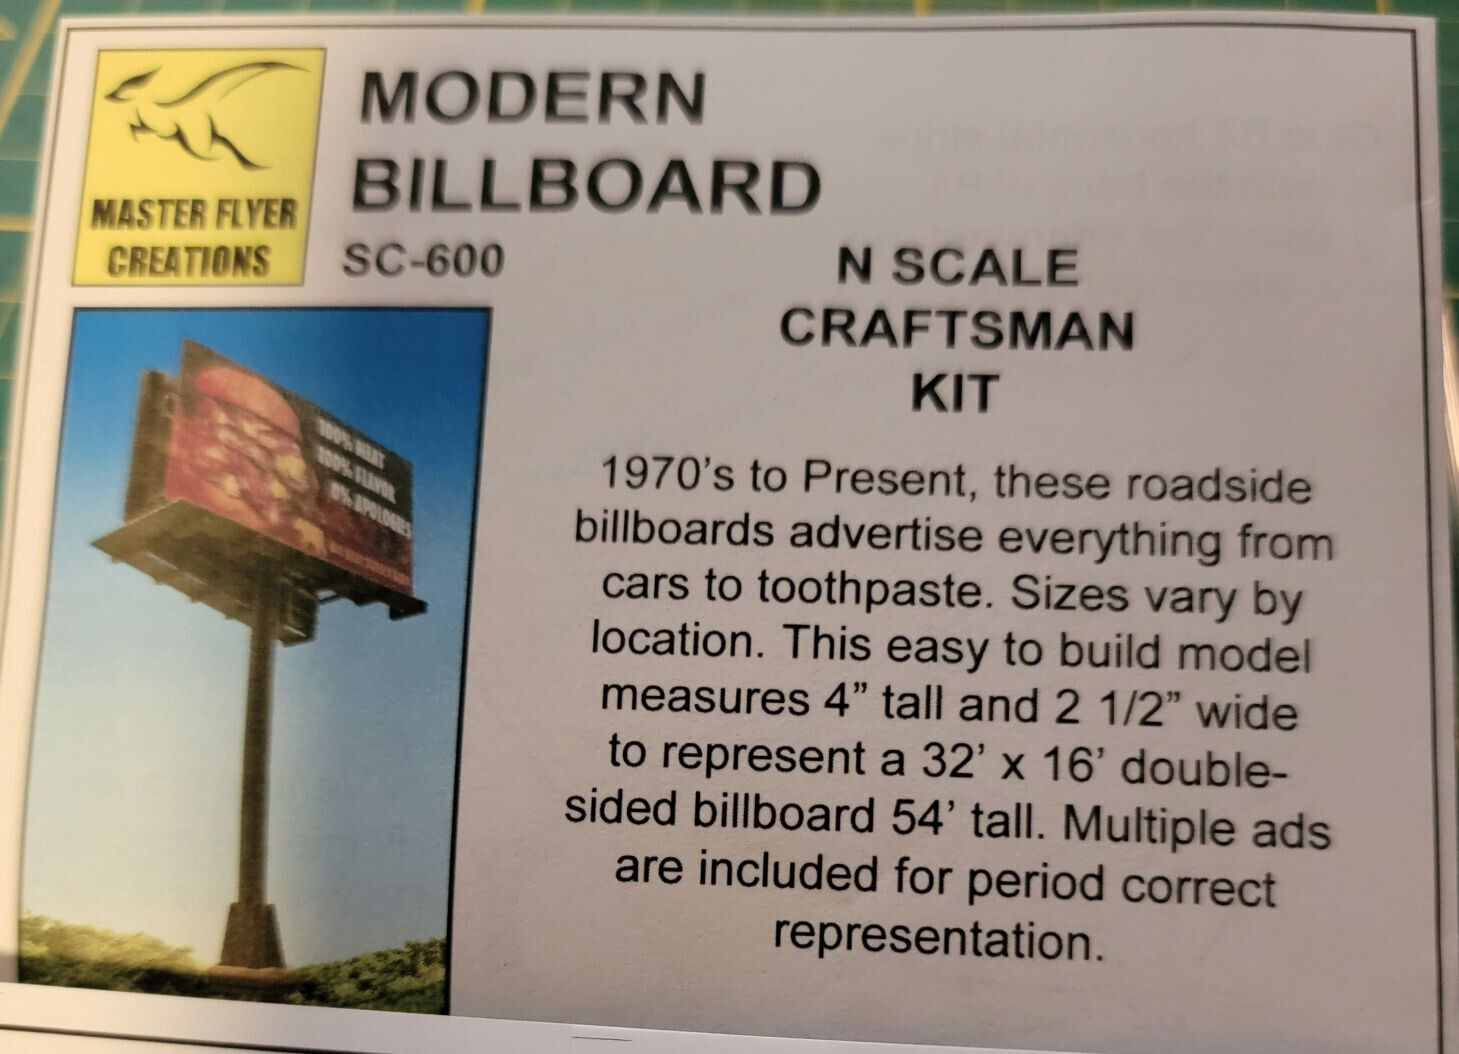 N Scale - Master Flyer Creations - SC-600 - Commercial Structures